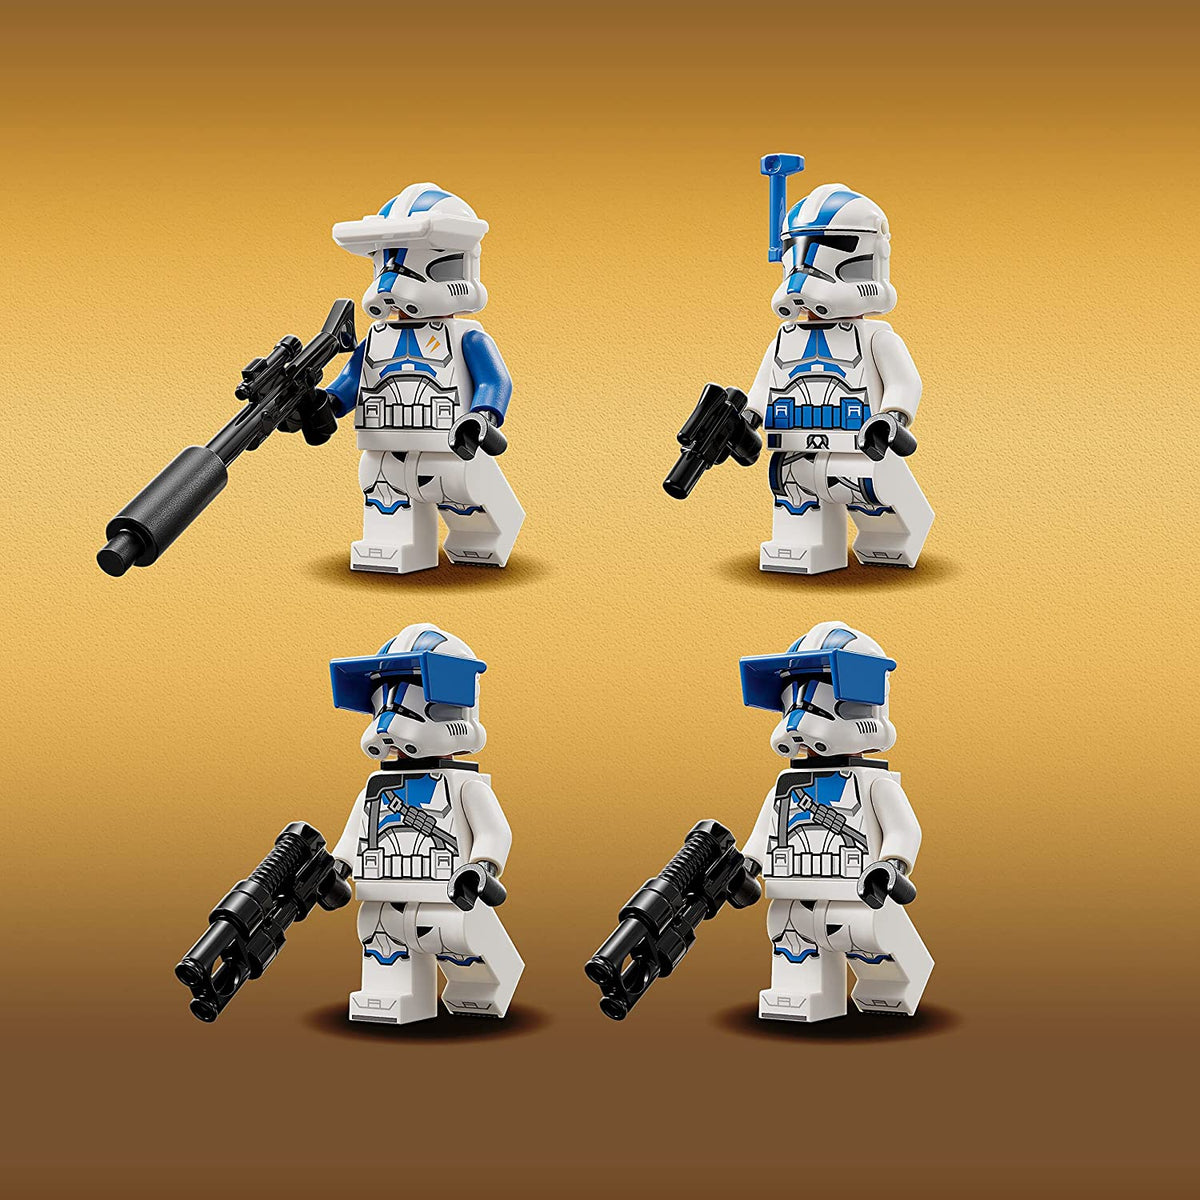 STAR WARS 75345: 501st Clone Troopers Battle Pack